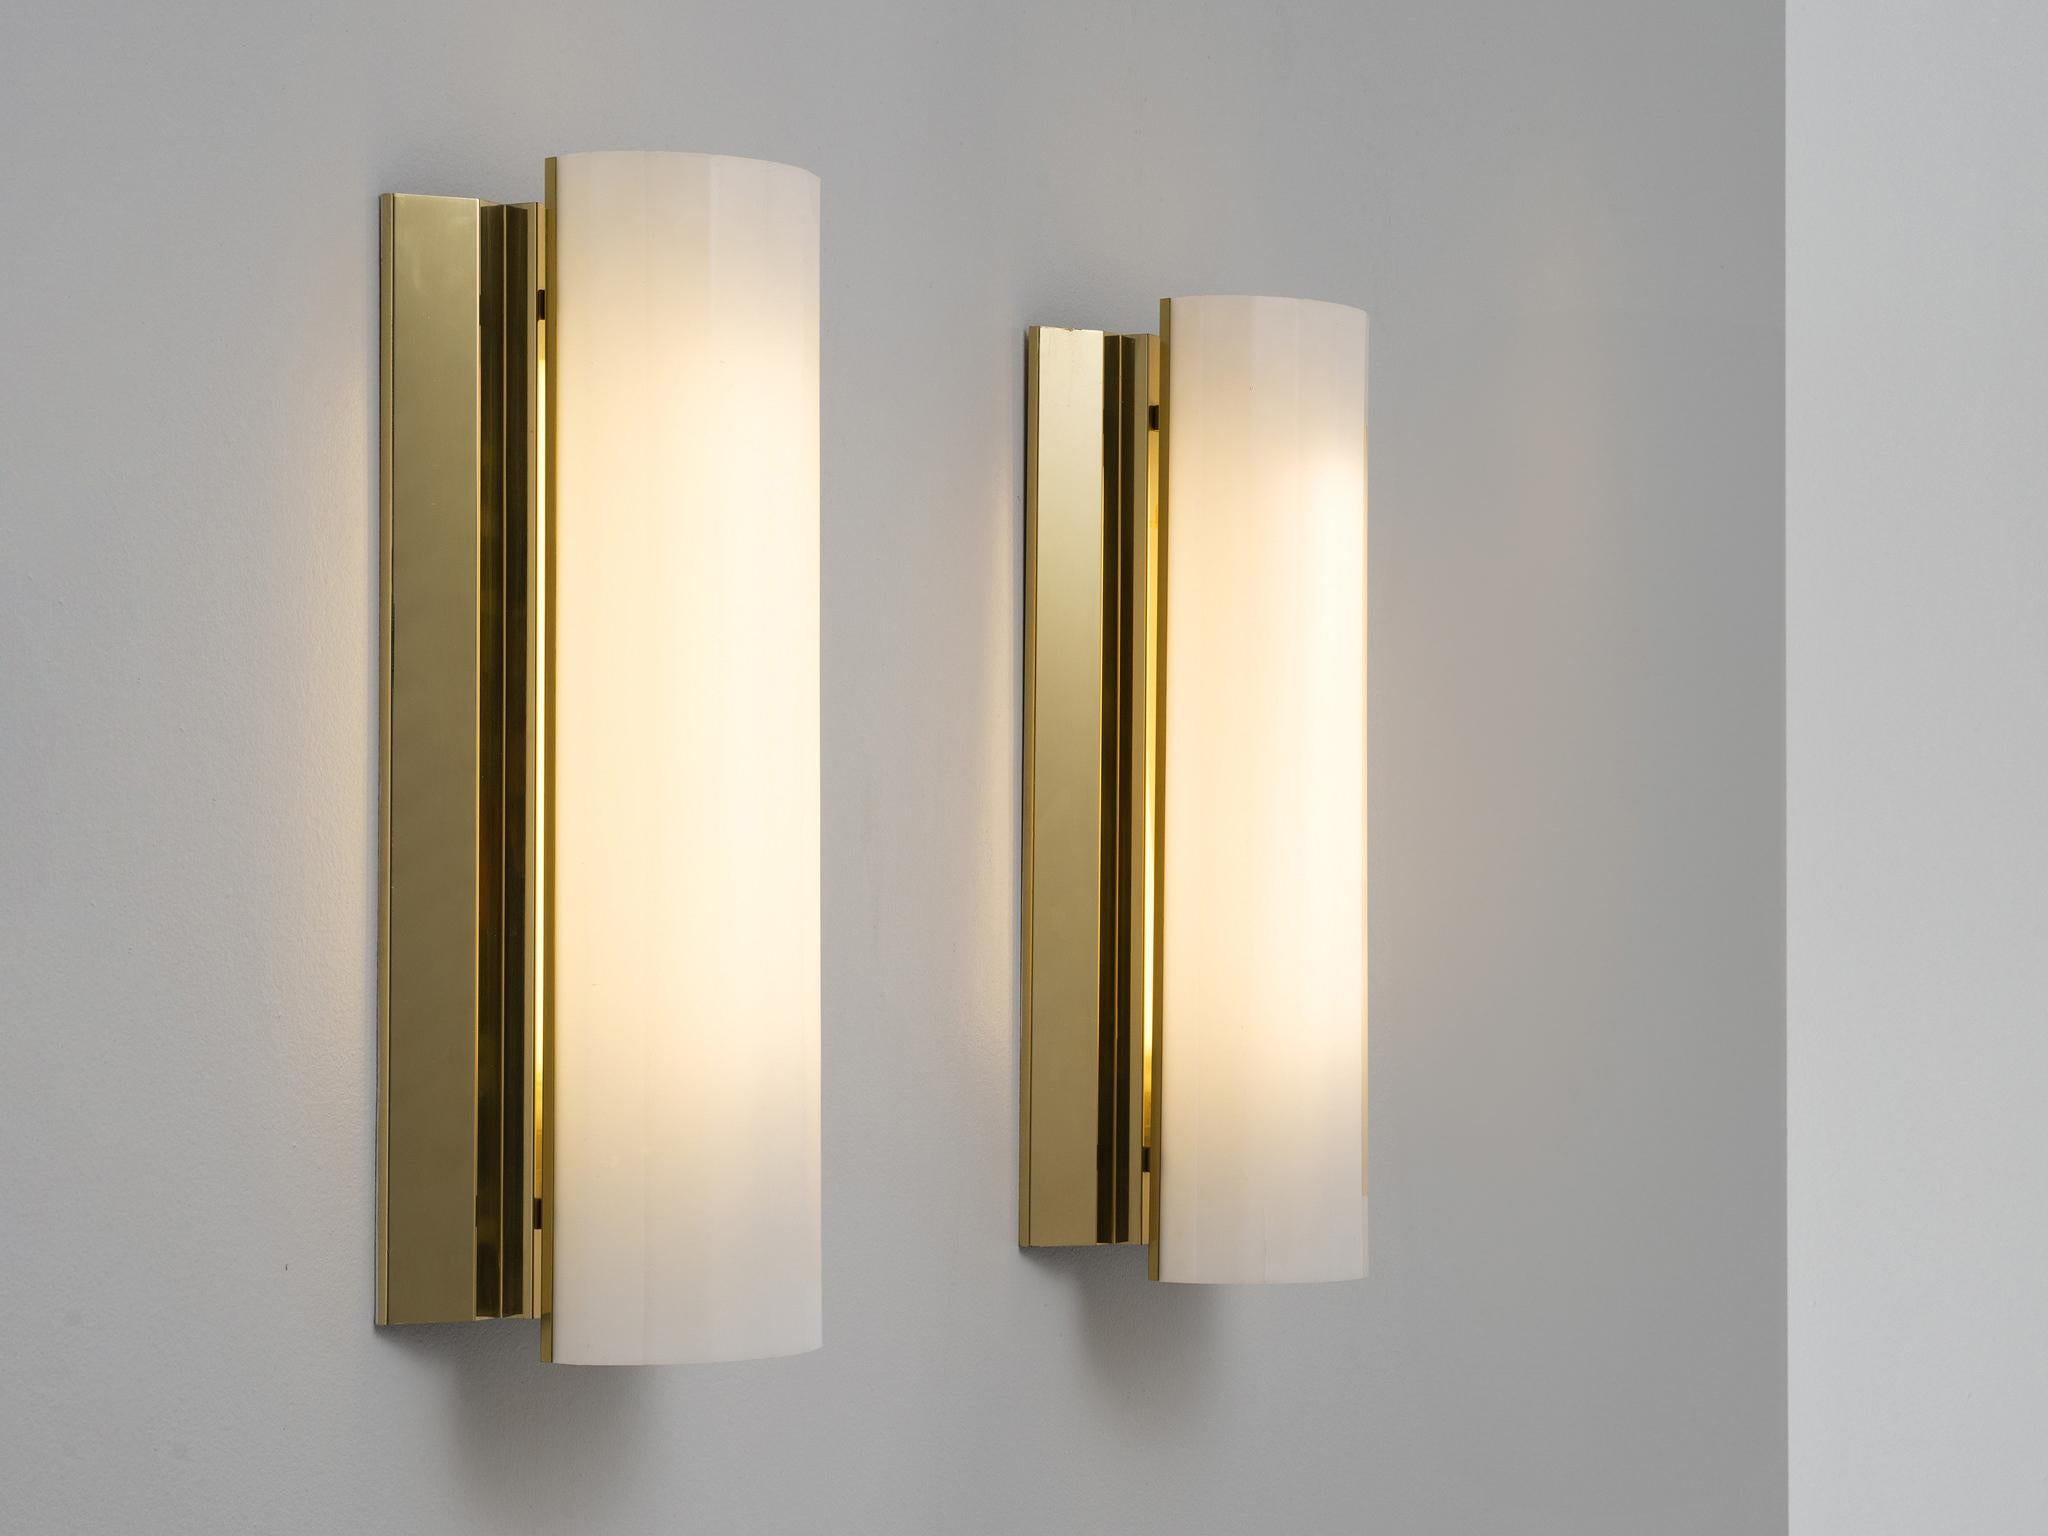 Large wall lights, brass, acrylic, Sweden, 1970s. 

These charming wall lights originate from Sweden and have a considerable size, making them ideal to illuminate hall ways or large spaces. Each sconce consists of a brass fixture with a polygon